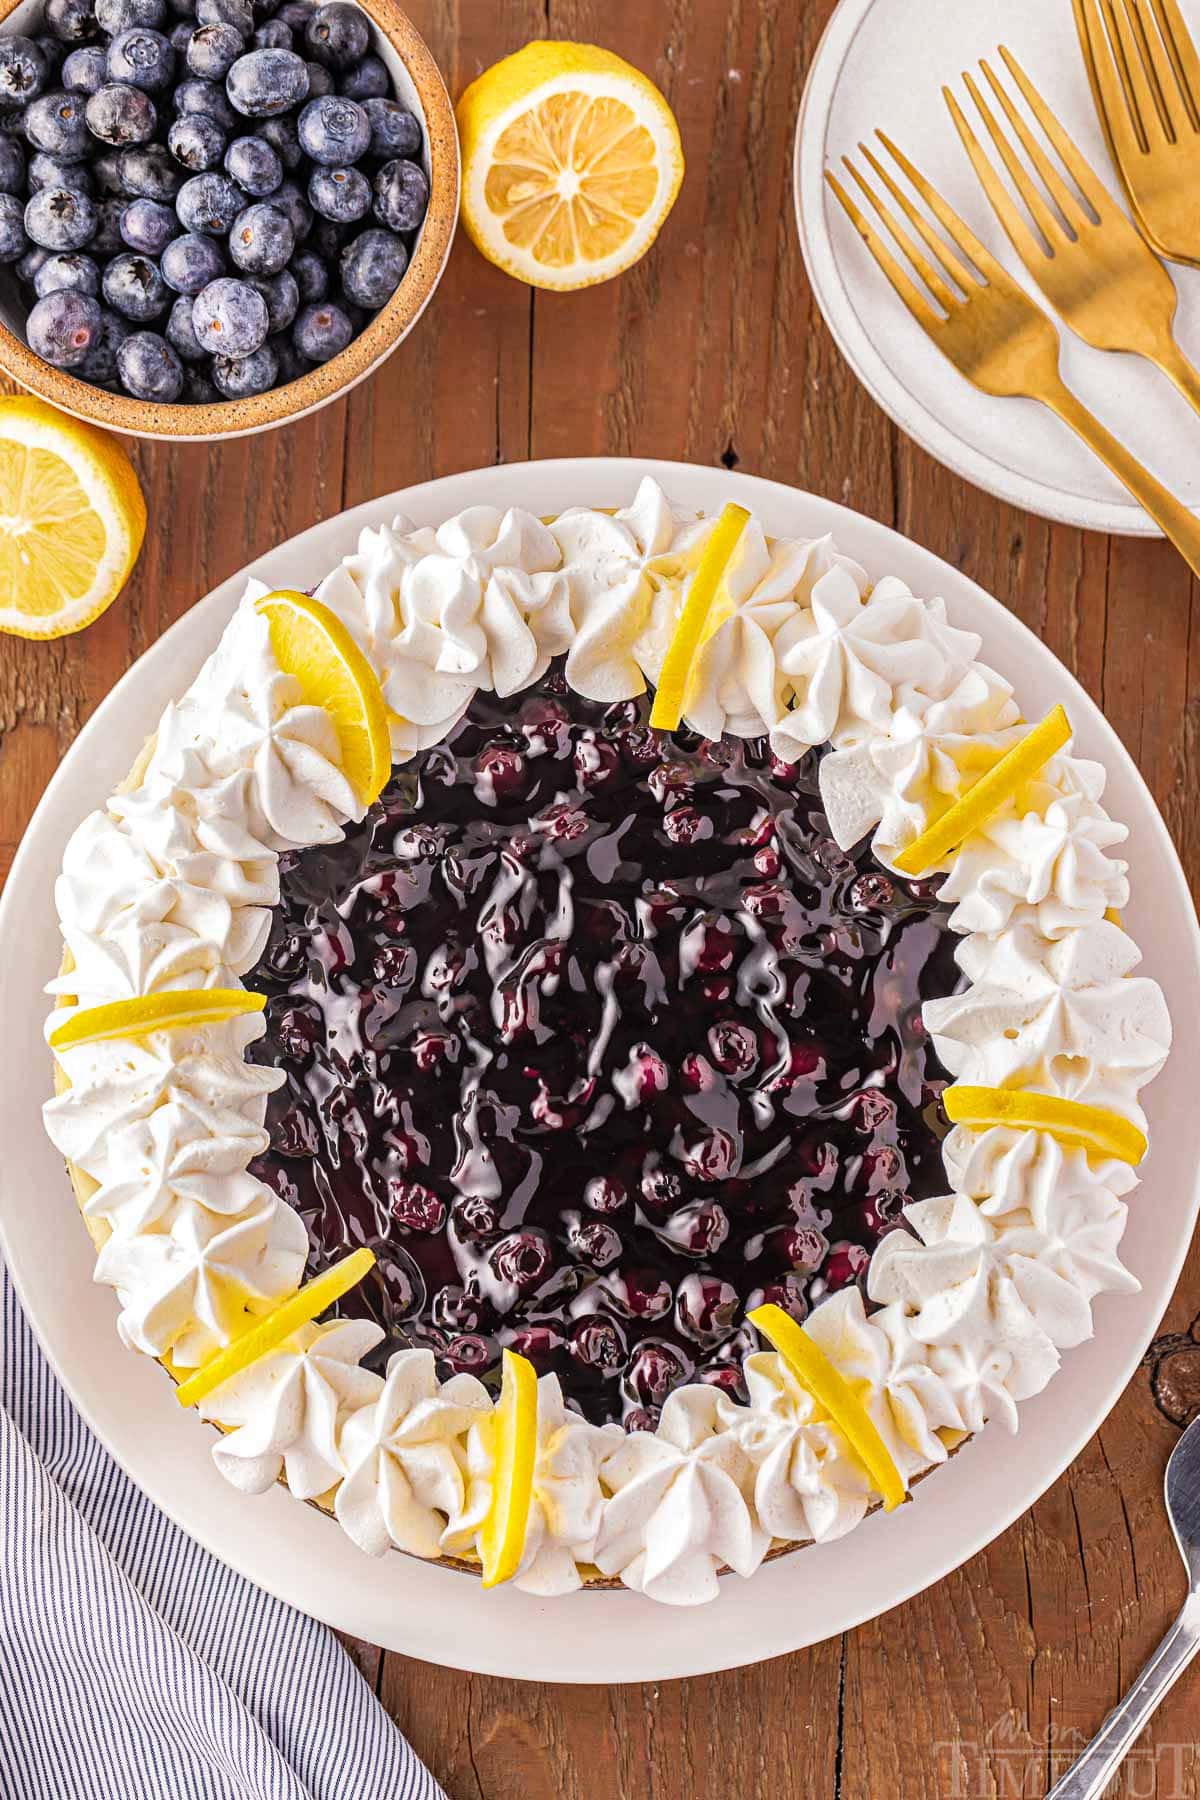 top down look at the blueberry pie filling on top of a lemon cheesecake. small bowl of blueberries next to the cheesecake.